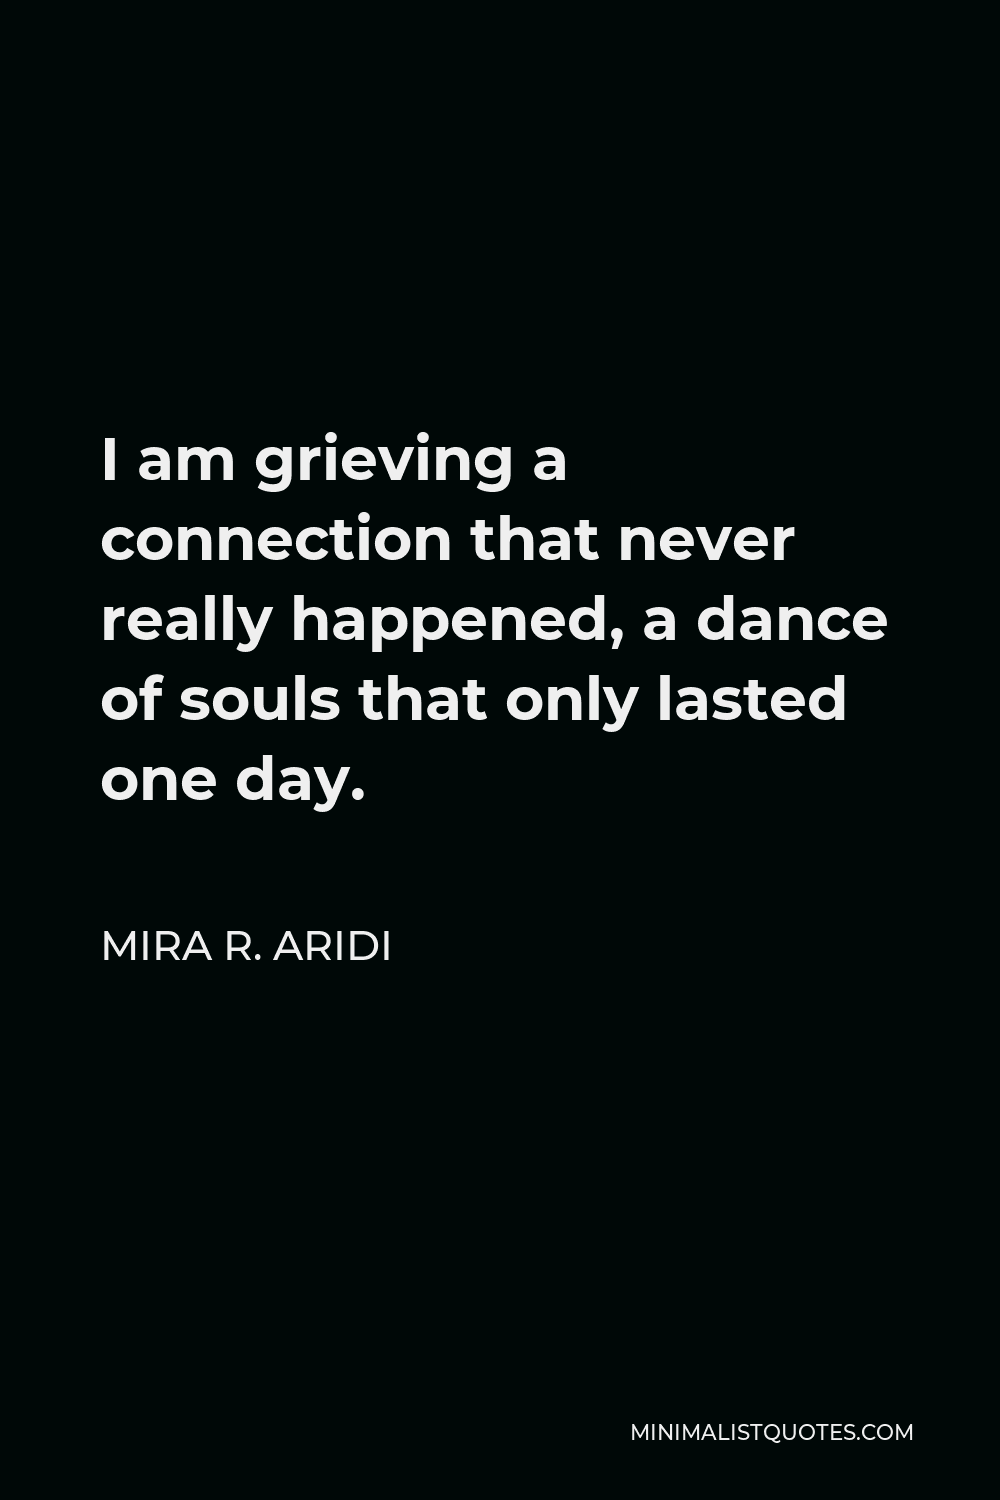 Mira R. Aridi Quote - I am grieving a connection that never really happened, a dance of souls that only lasted one day.